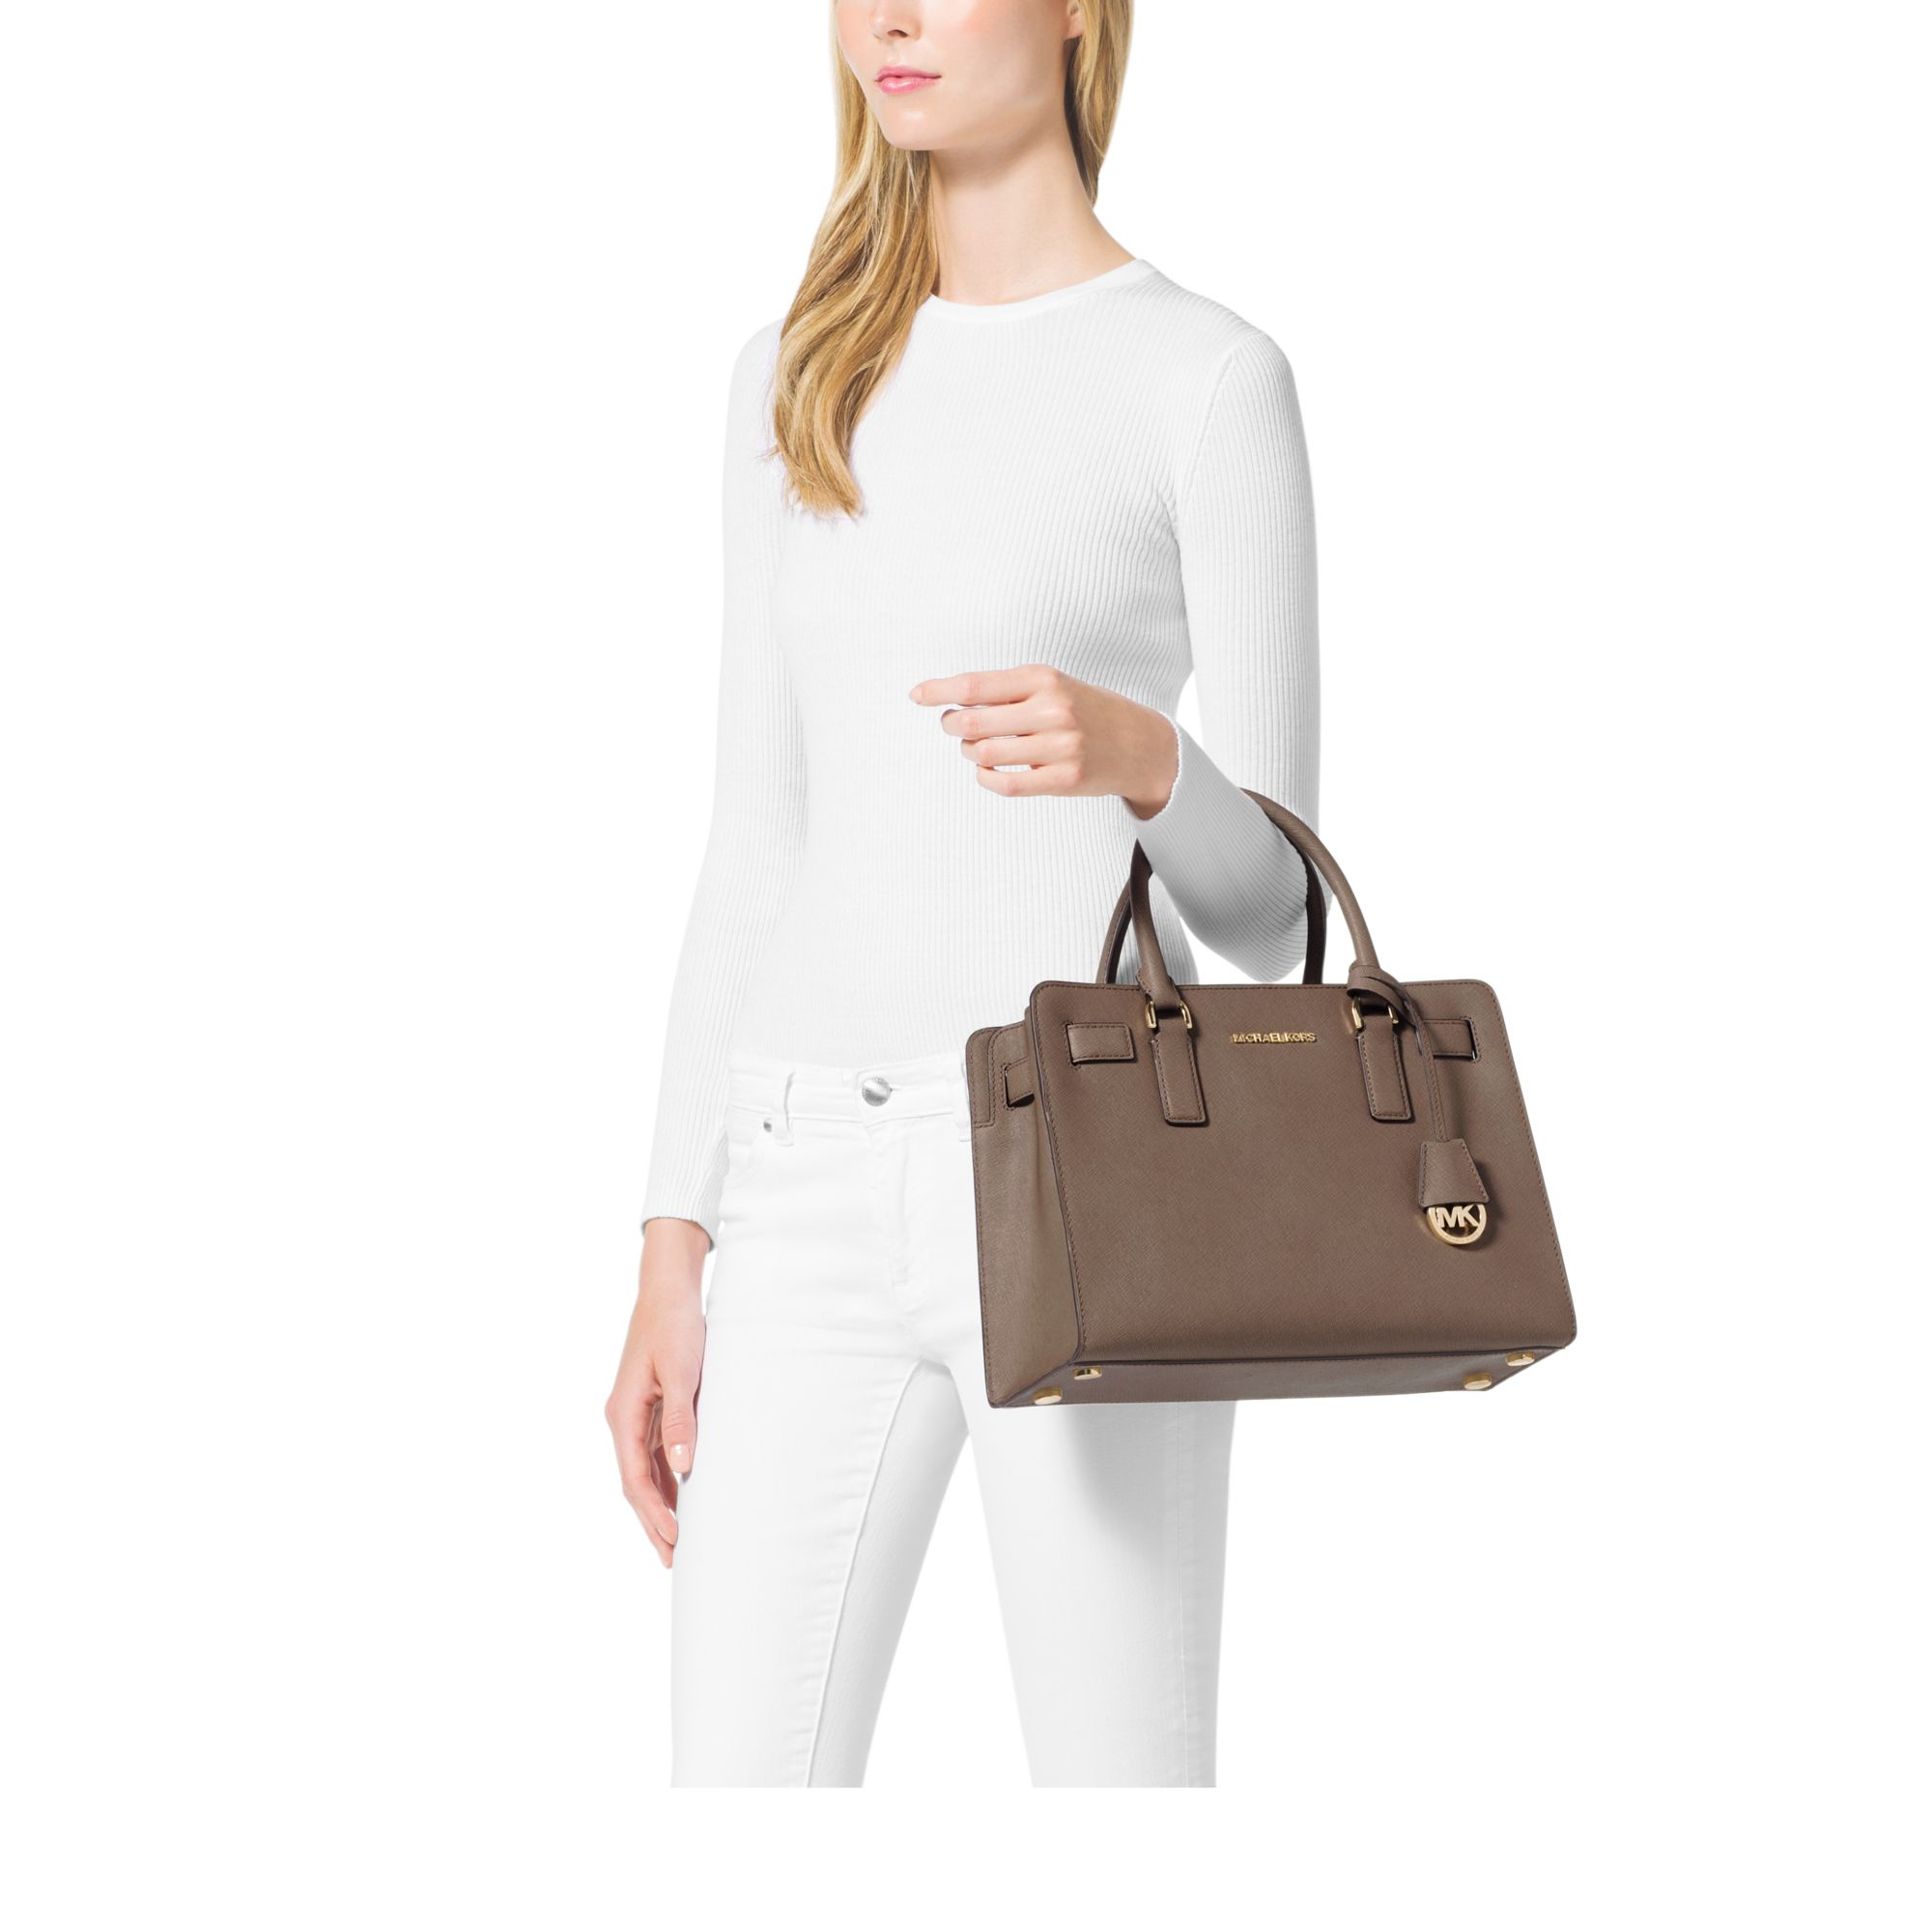 Michael Kors Dillon Saffiano Leather Satchel in Brown - Lyst